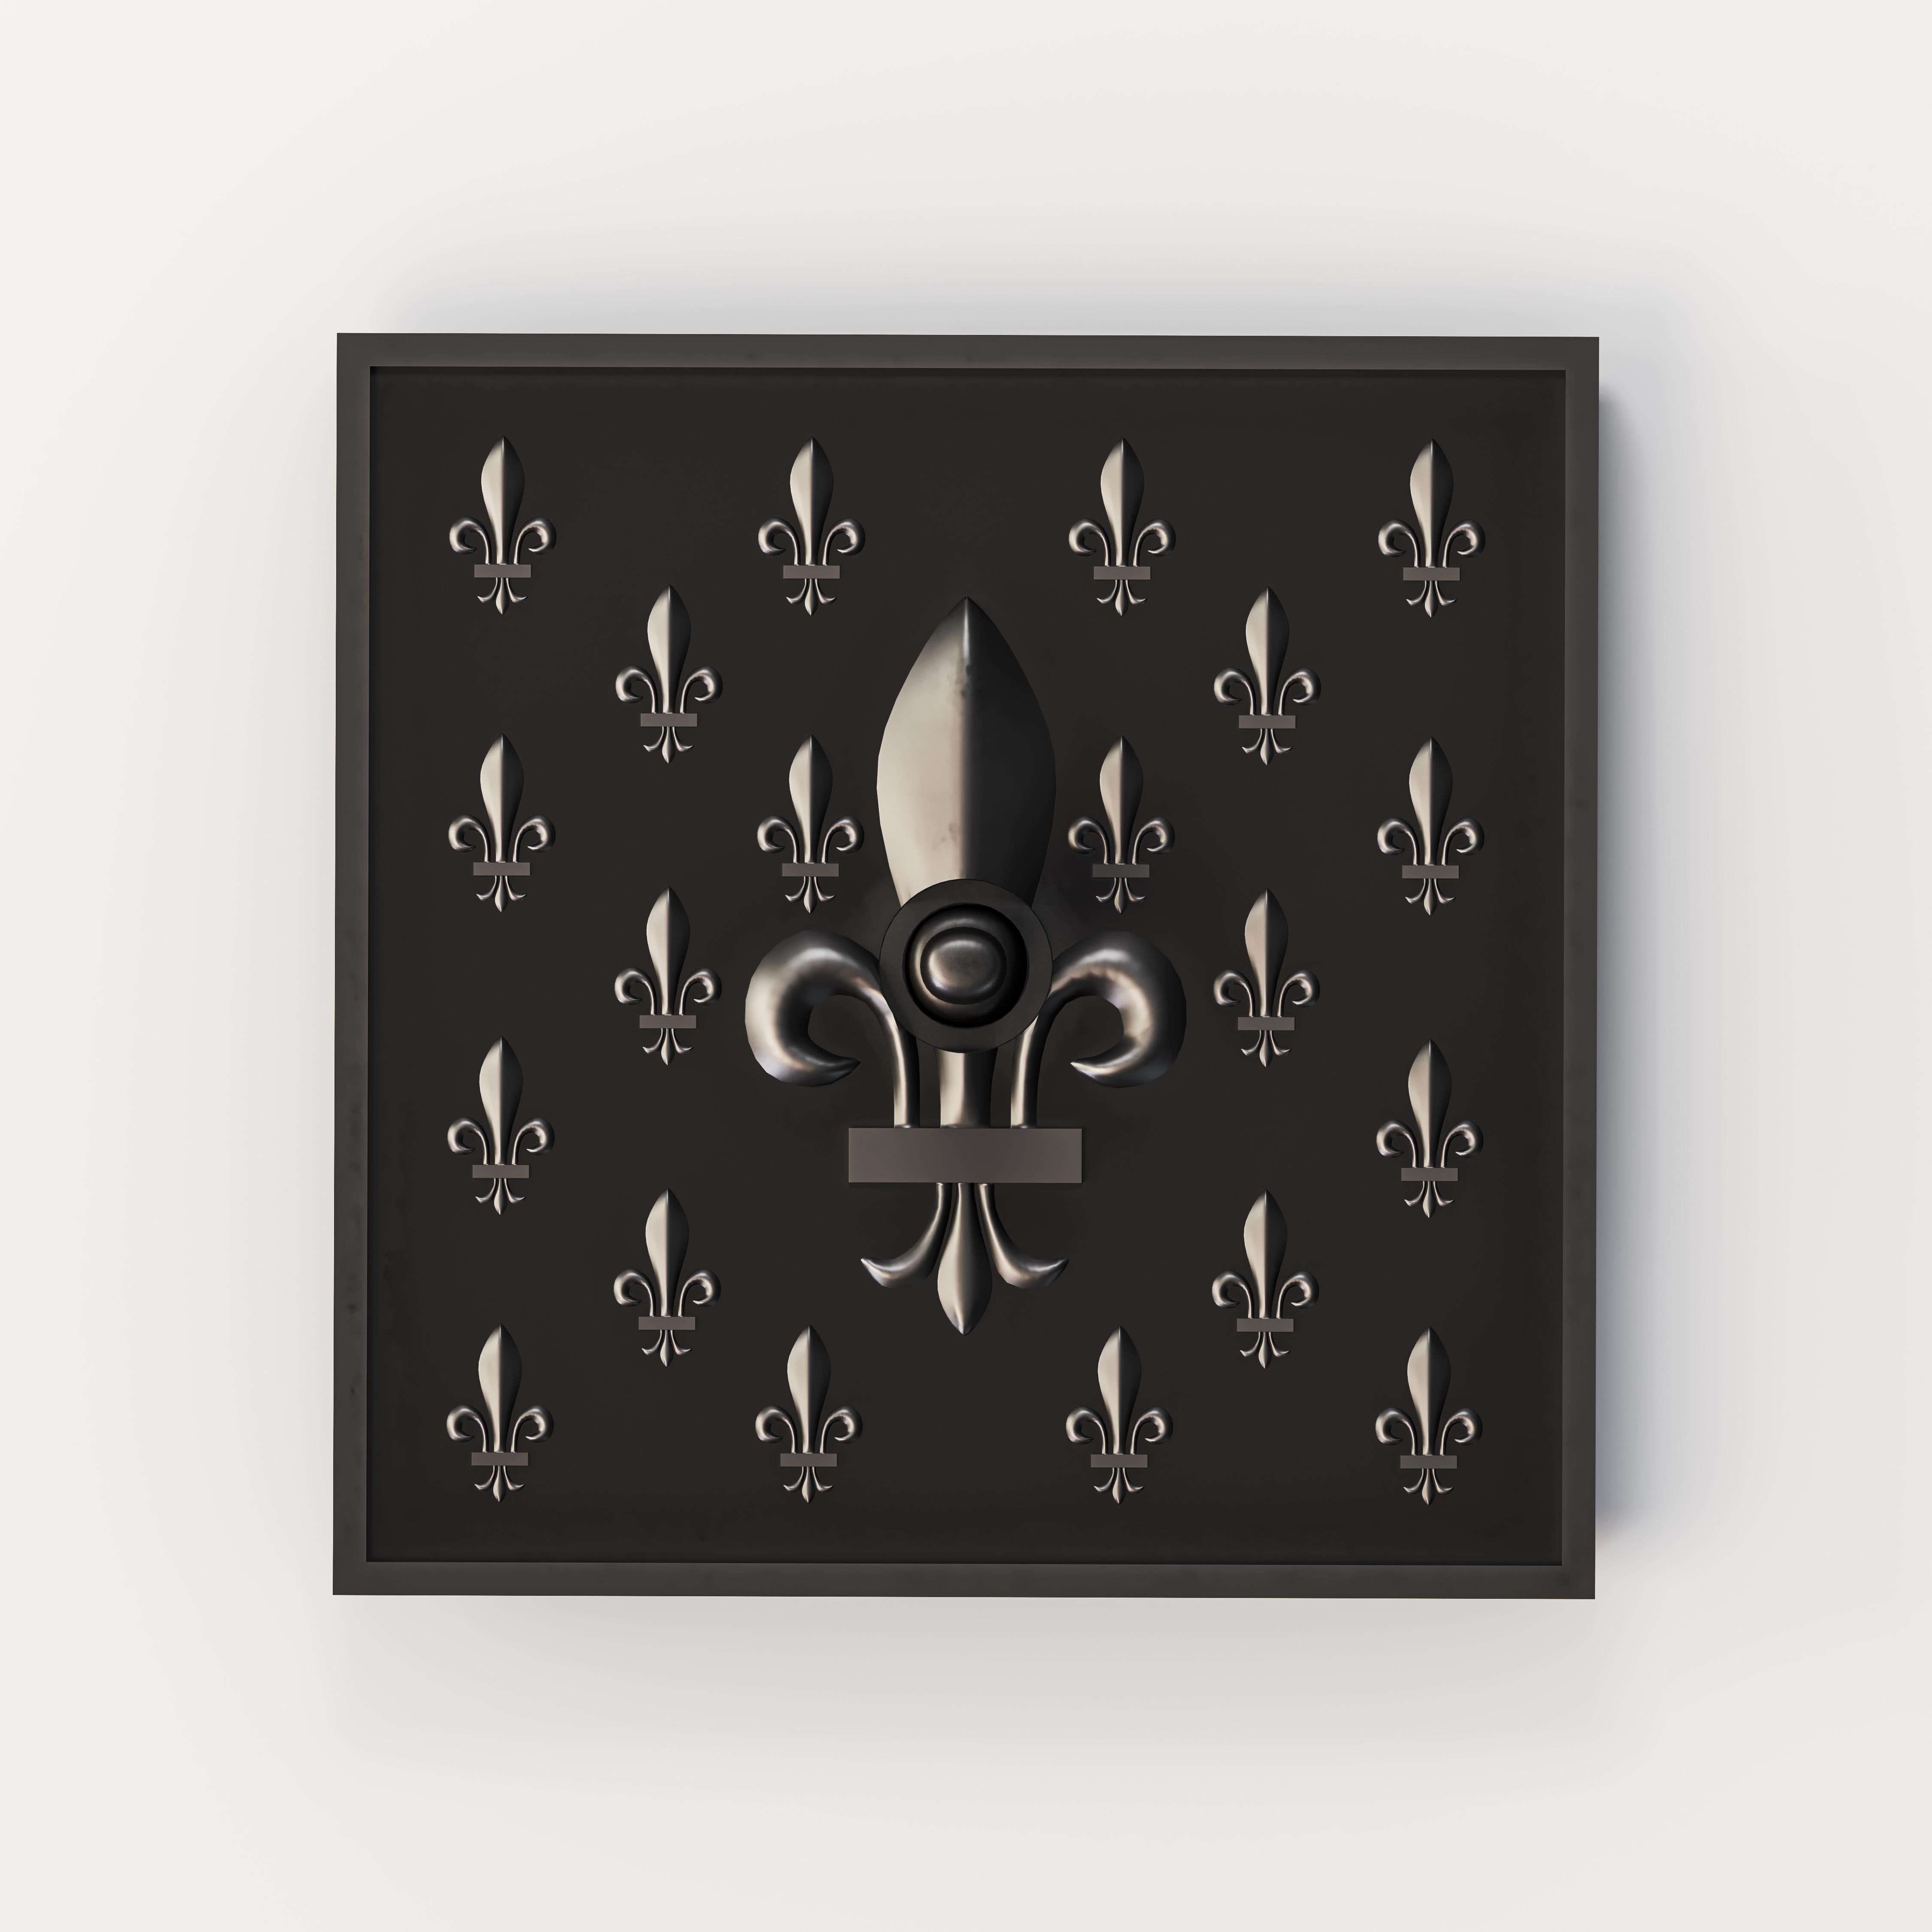 Versailles Metail Noir Light Switch by Jérôme Bugara
Dimensions: W 9,4 x H 9,4 cm.
Materials: Metal.

Available in different finishes. Please contact us.

Jérôme Bugara, trained at the prestigious Ecole Boulle, is a renowned interior architect and